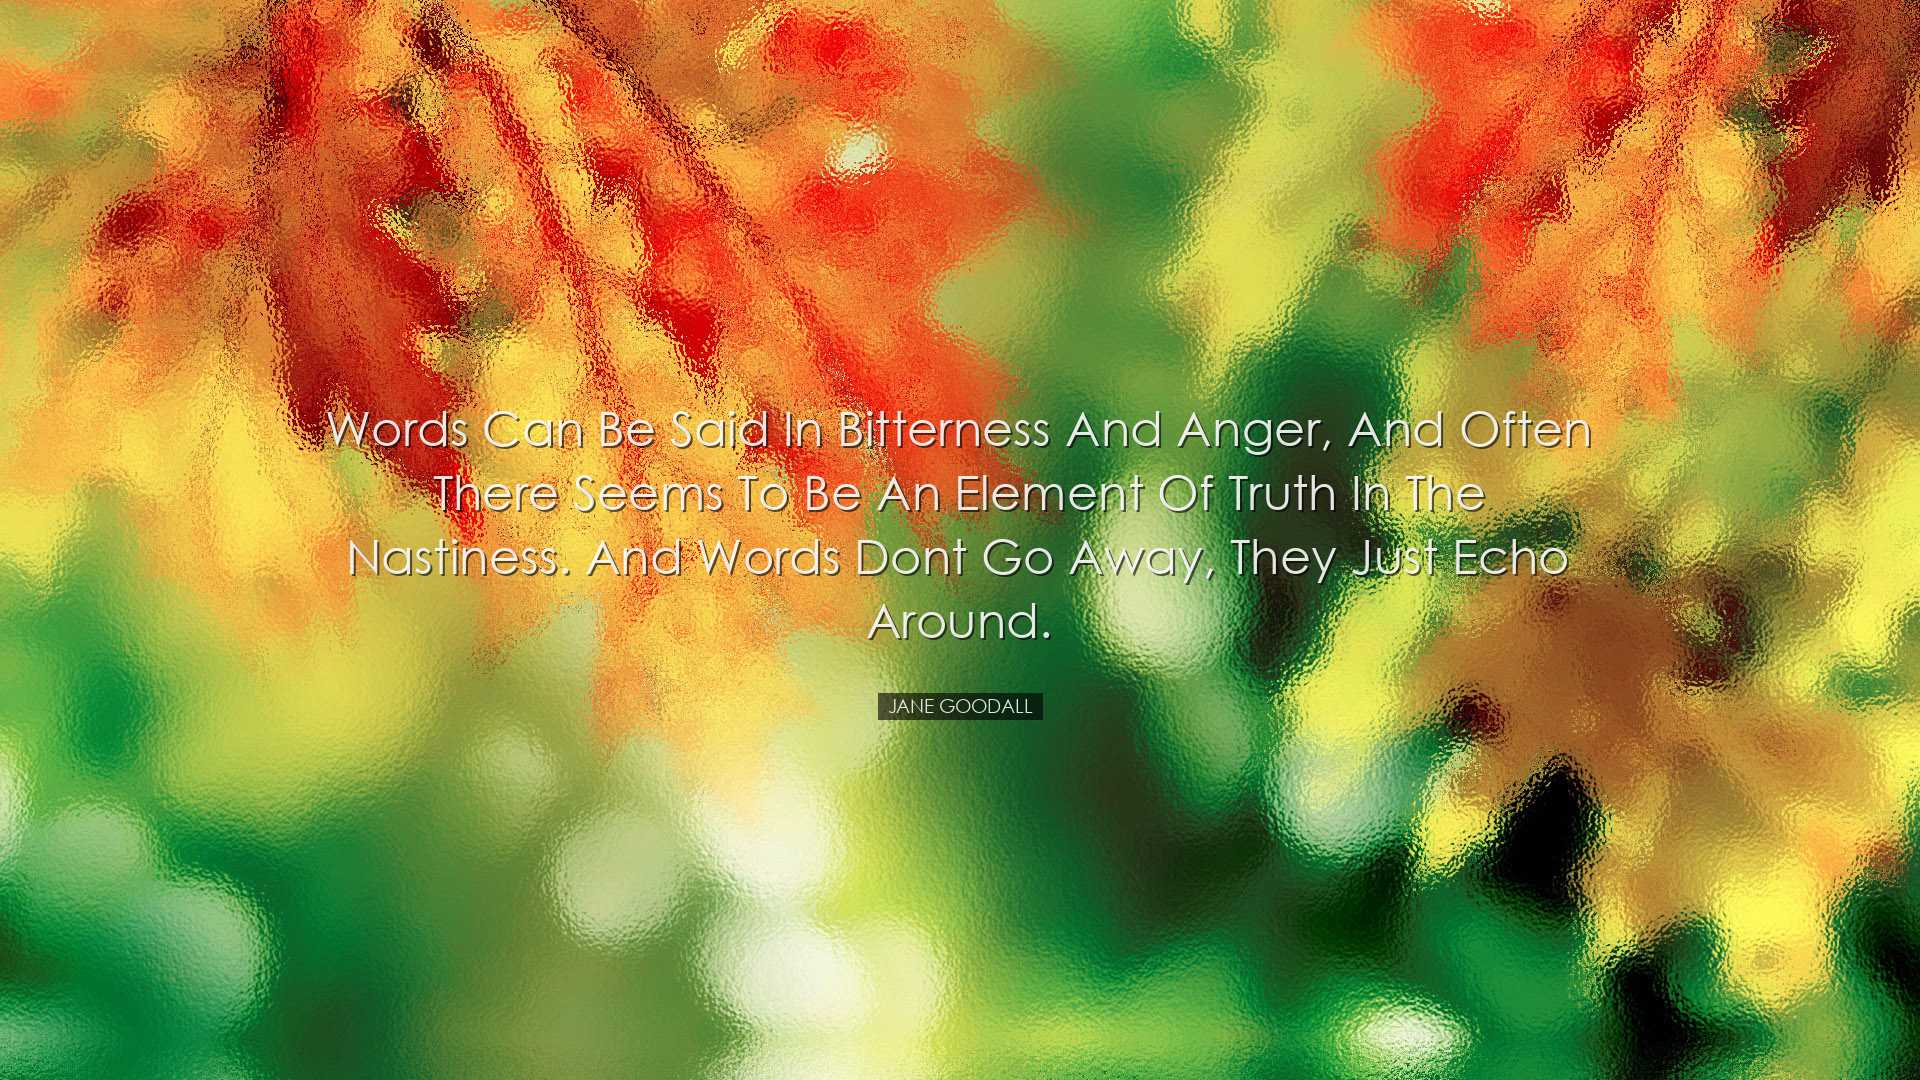 Words can be said in bitterness and anger, and often there seems t